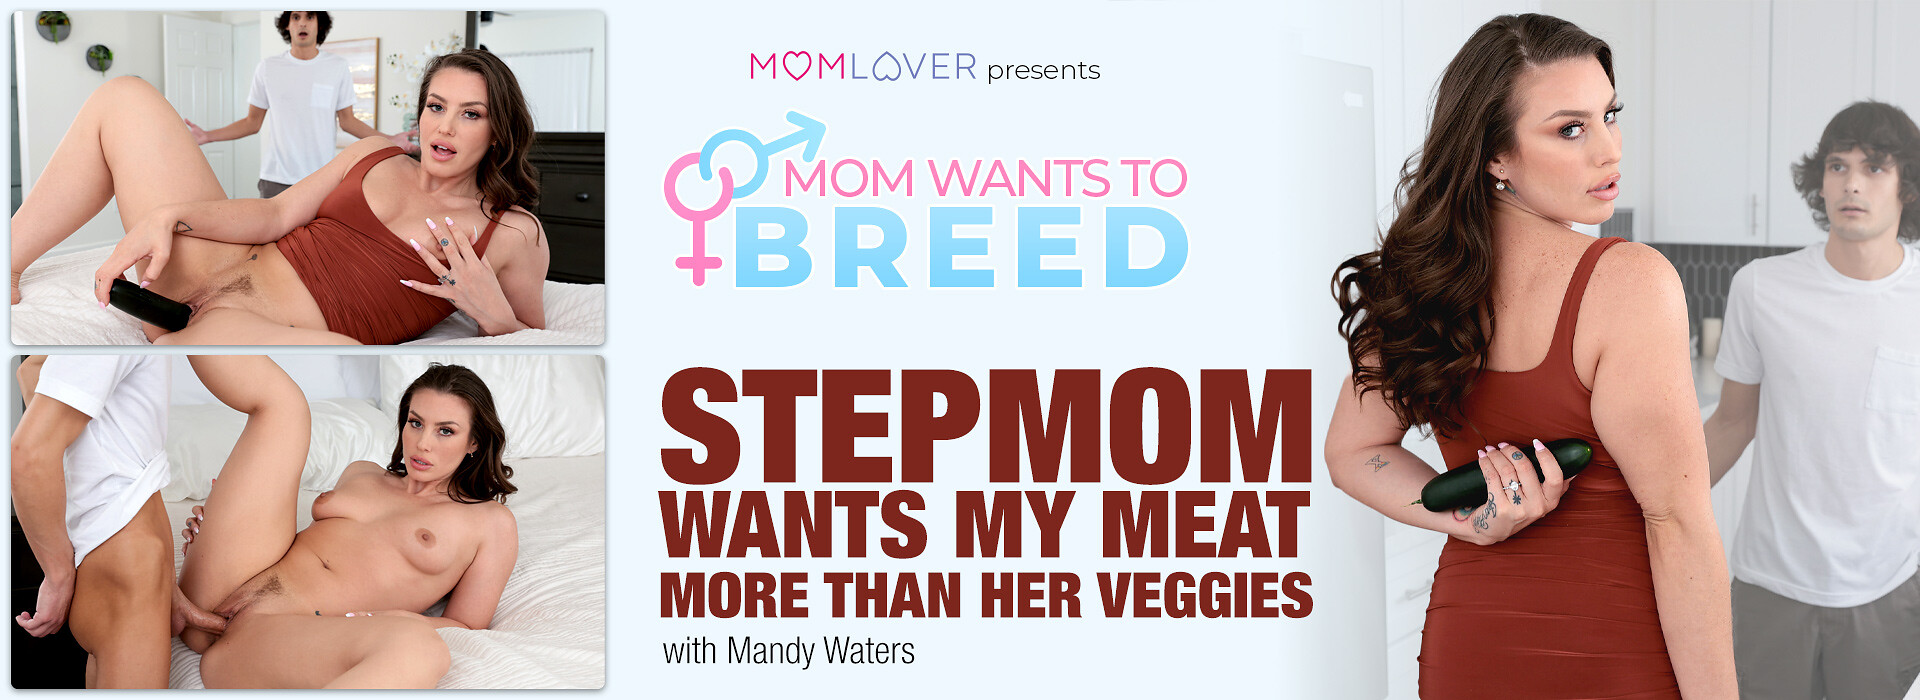 Stepmom Wants My Meat More Than Her Veggies